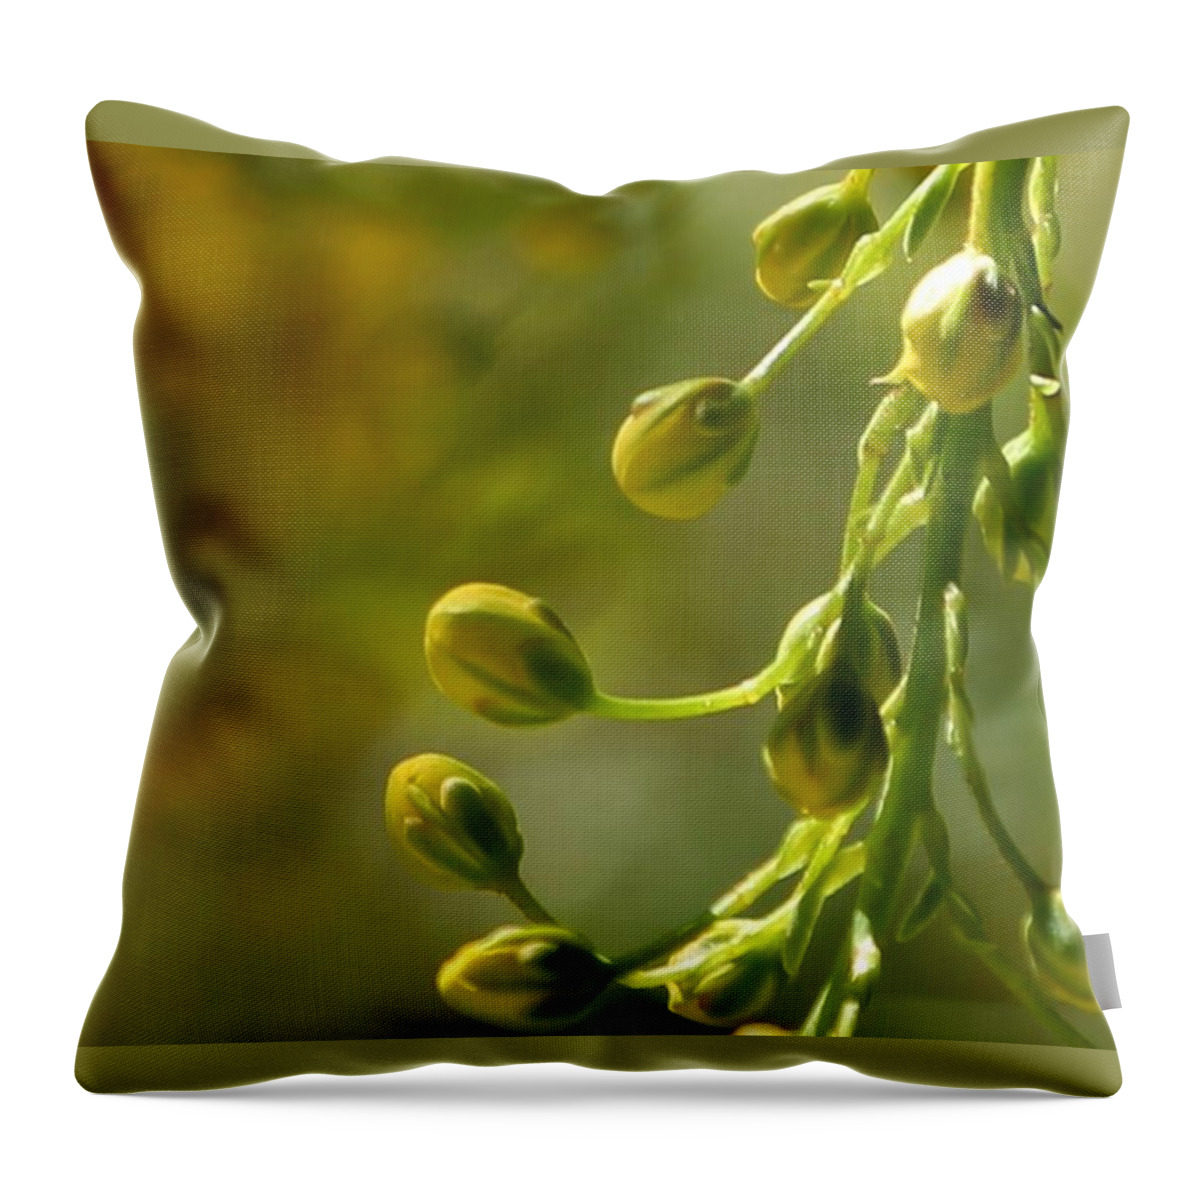 Flowers Throw Pillow featuring the photograph Gold Of Spring by Sheila Ping